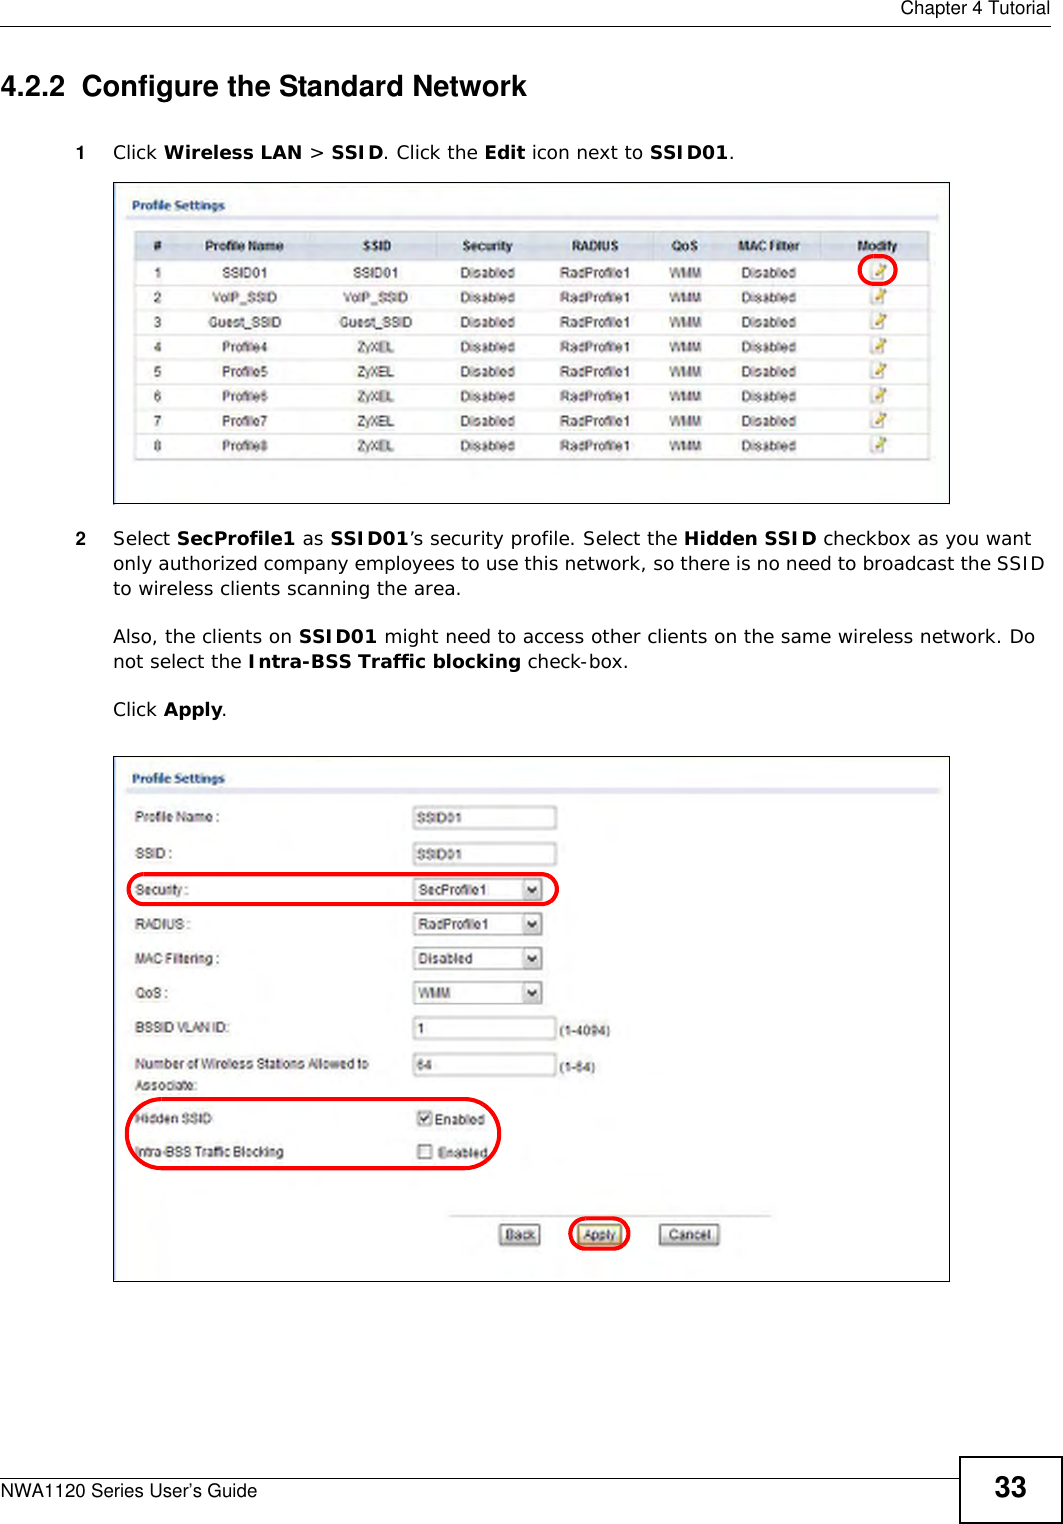  Chapter 4 TutorialNWA1120 Series User’s Guide 334.2.2  Configure the Standard Network1Click Wireless LAN &gt; SSID. Click the Edit icon next to SSID01. 2Select SecProfile1 as SSID01’s security profile. Select the Hidden SSID checkbox as you want only authorized company employees to use this network, so there is no need to broadcast the SSID to wireless clients scanning the area. Also, the clients on SSID01 might need to access other clients on the same wireless network. Do not select the Intra-BSS Traffic blocking check-box. Click Apply.